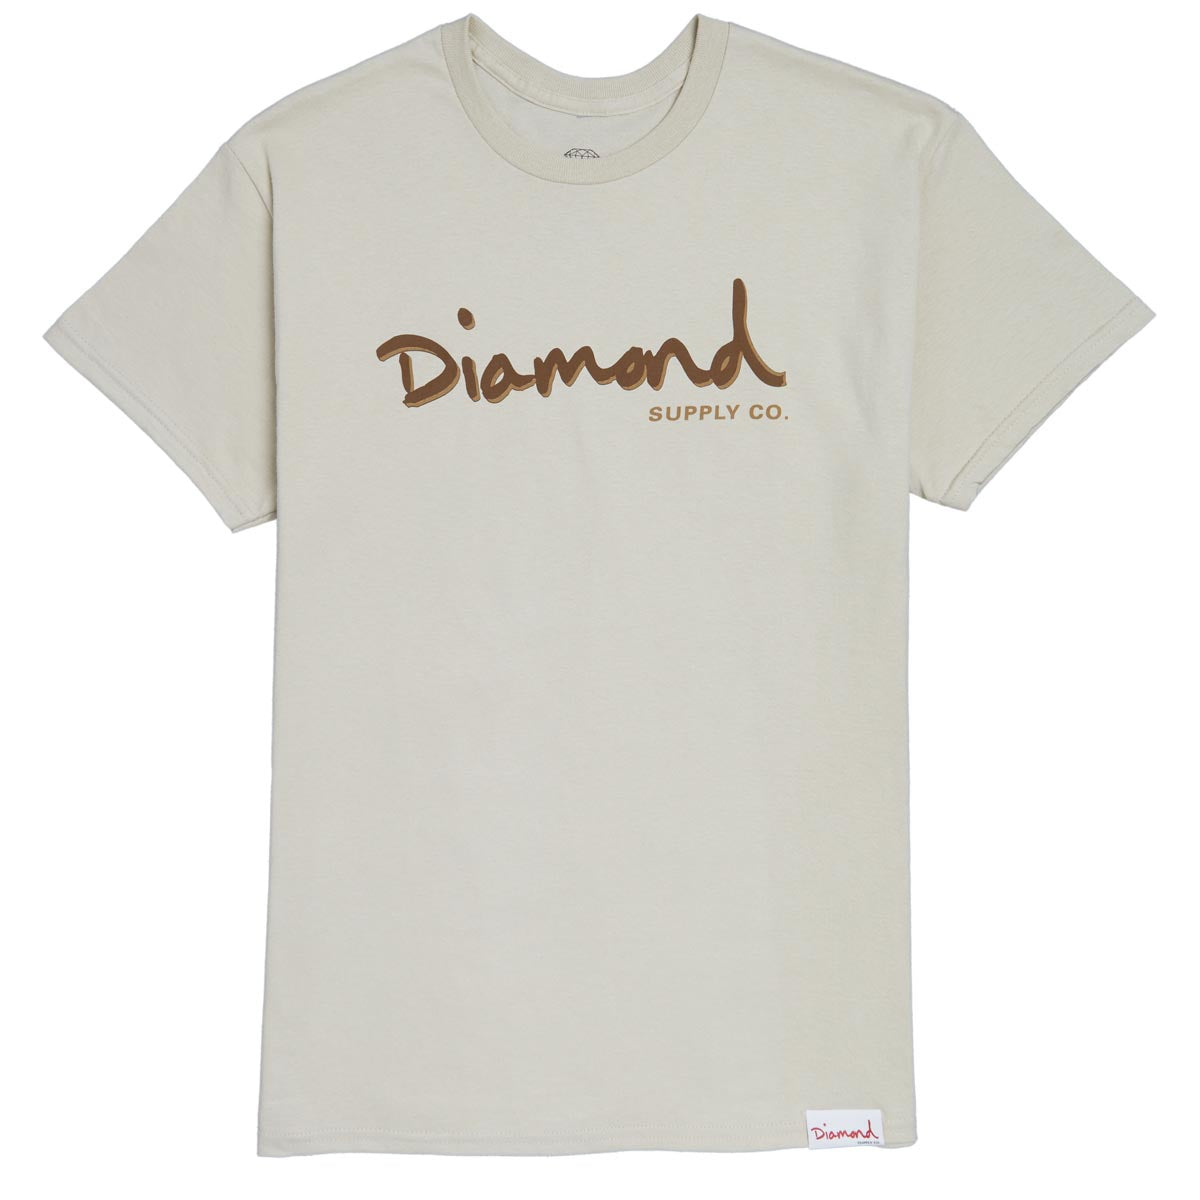 Diamond Supply Co. Outline T-Shirt - Natural image 1